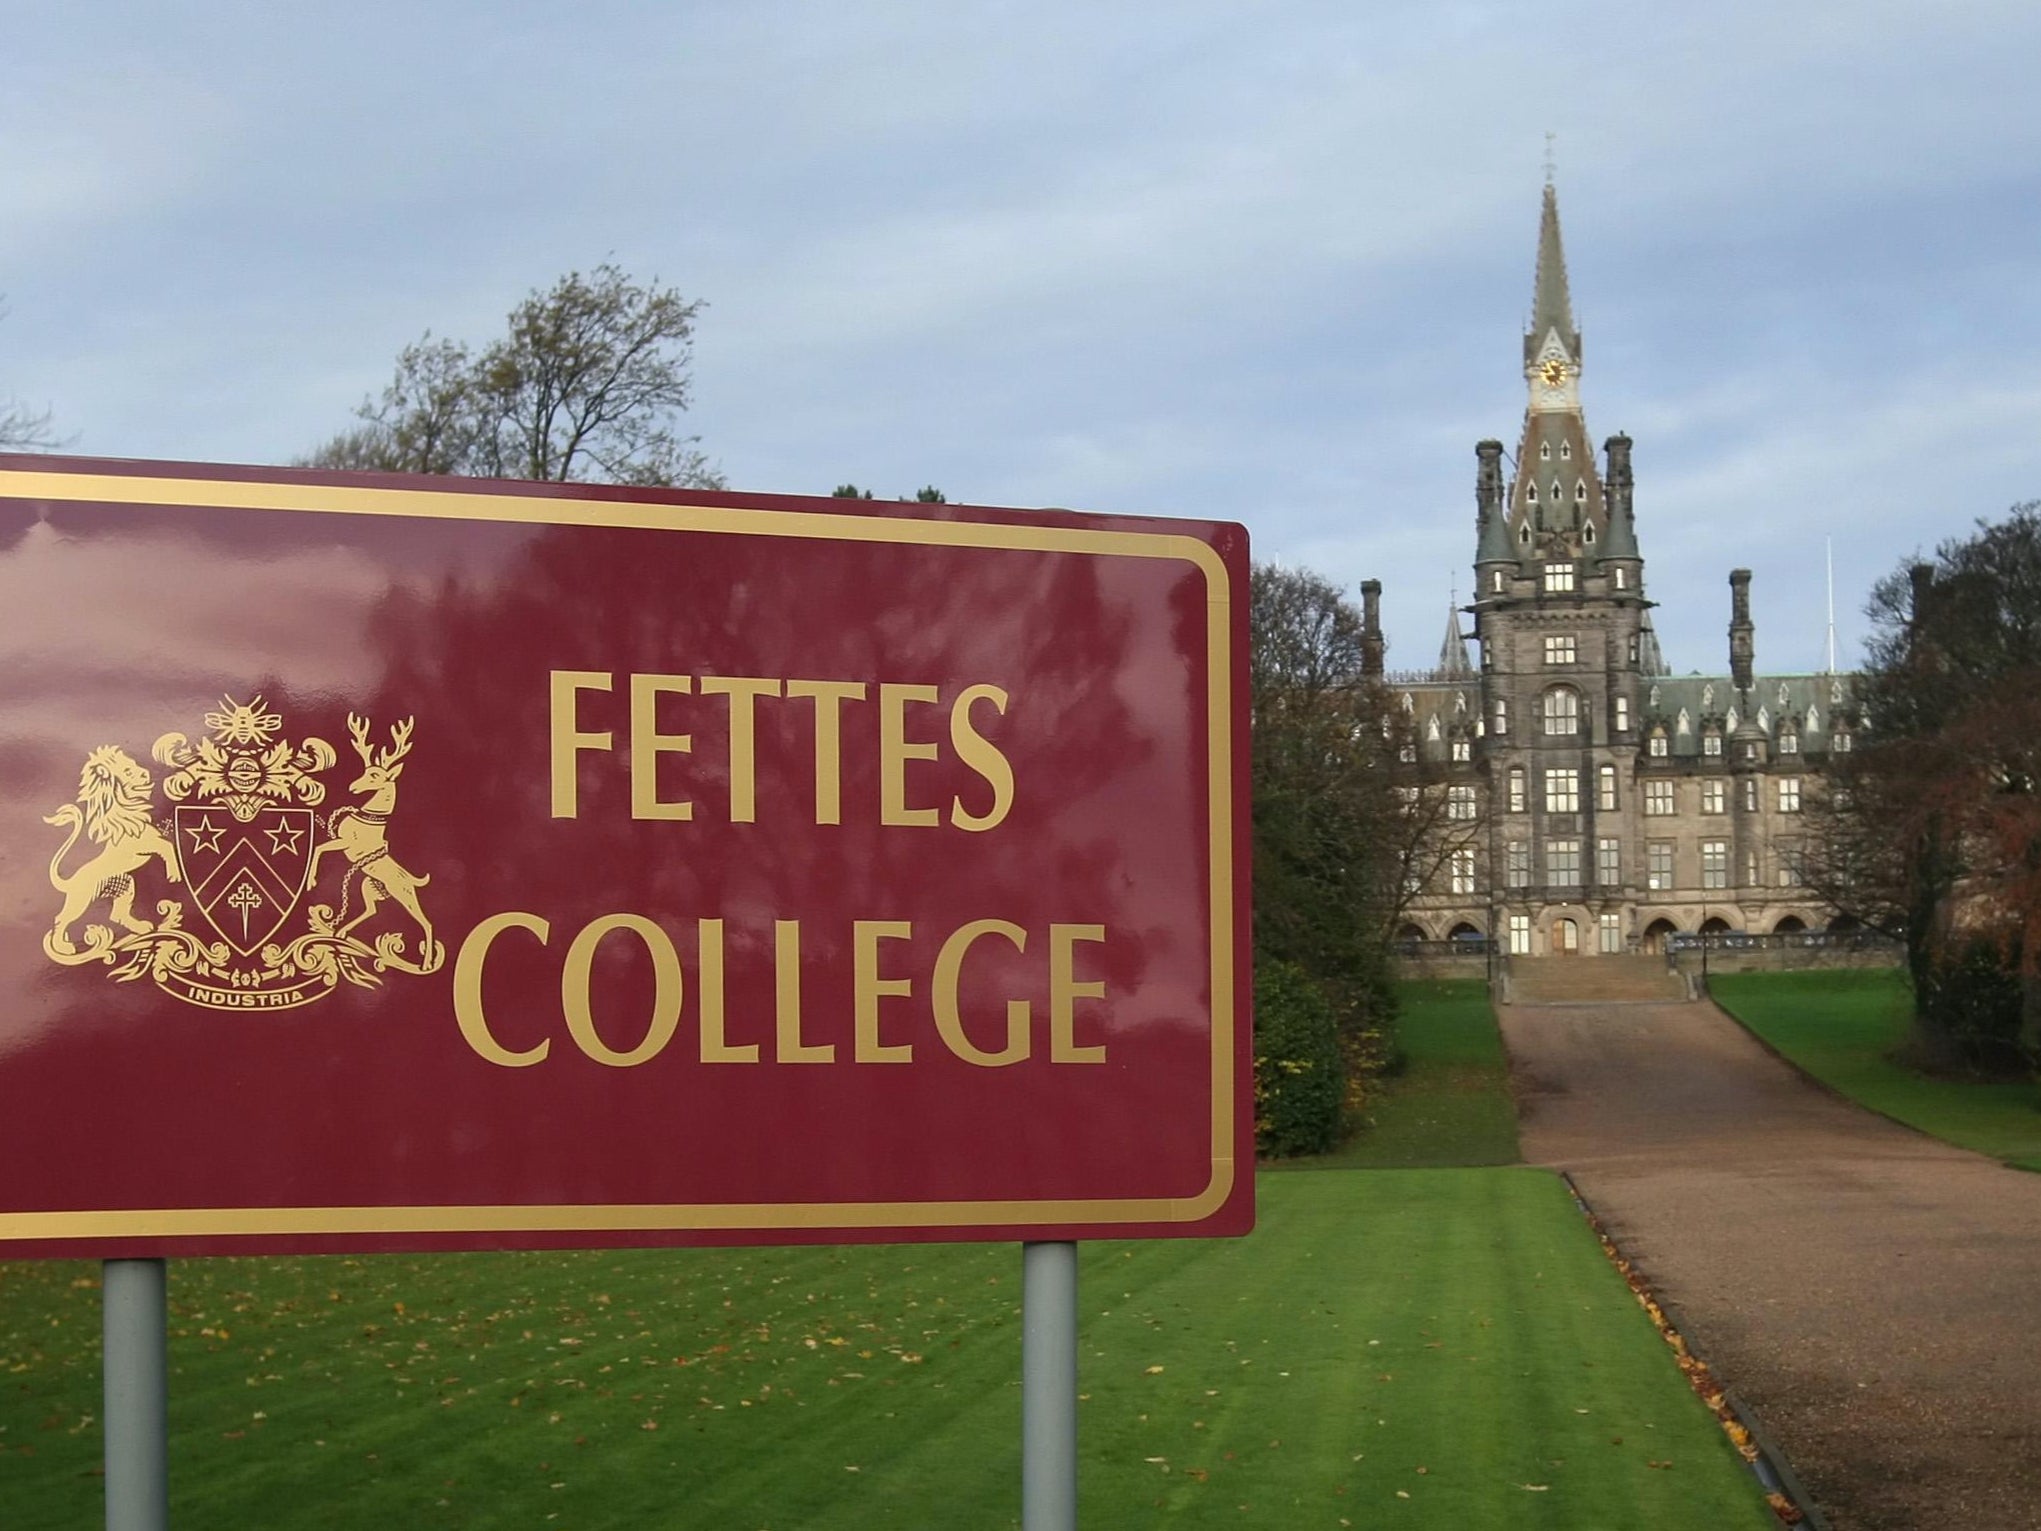 The prestigious Fettes College in Edinburgh, which was attended by former prime minister Tony Blair from 1966 to 1971